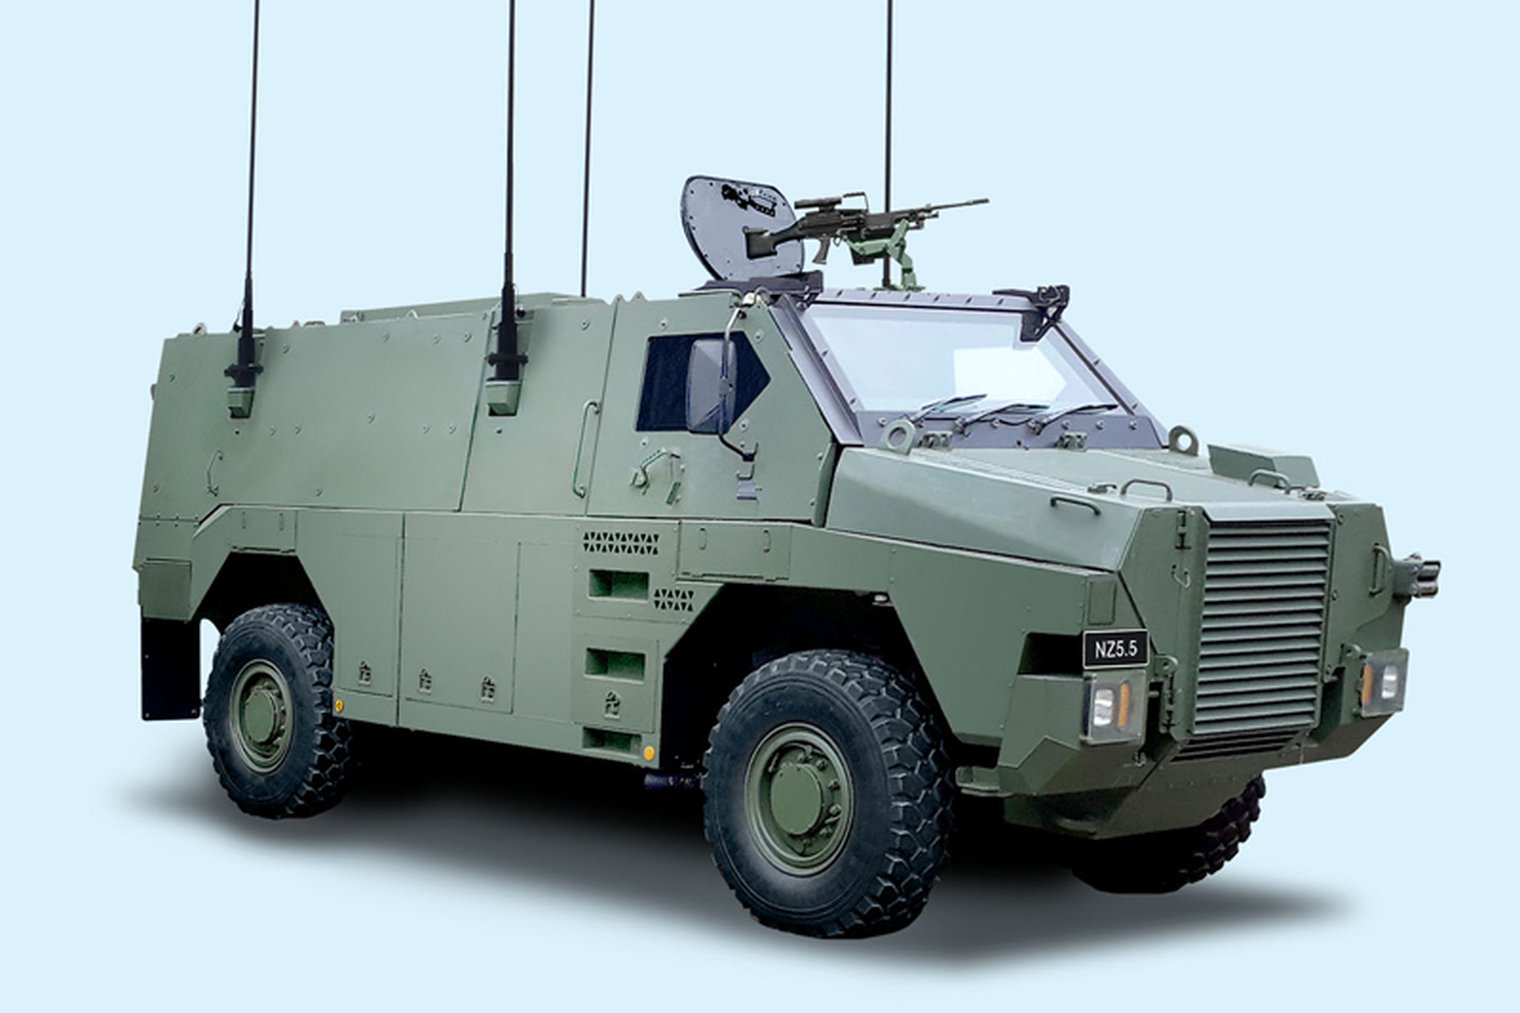 New Zealand Army to Buy 43 Bushmaster NZ5.5 Protected Vehicles